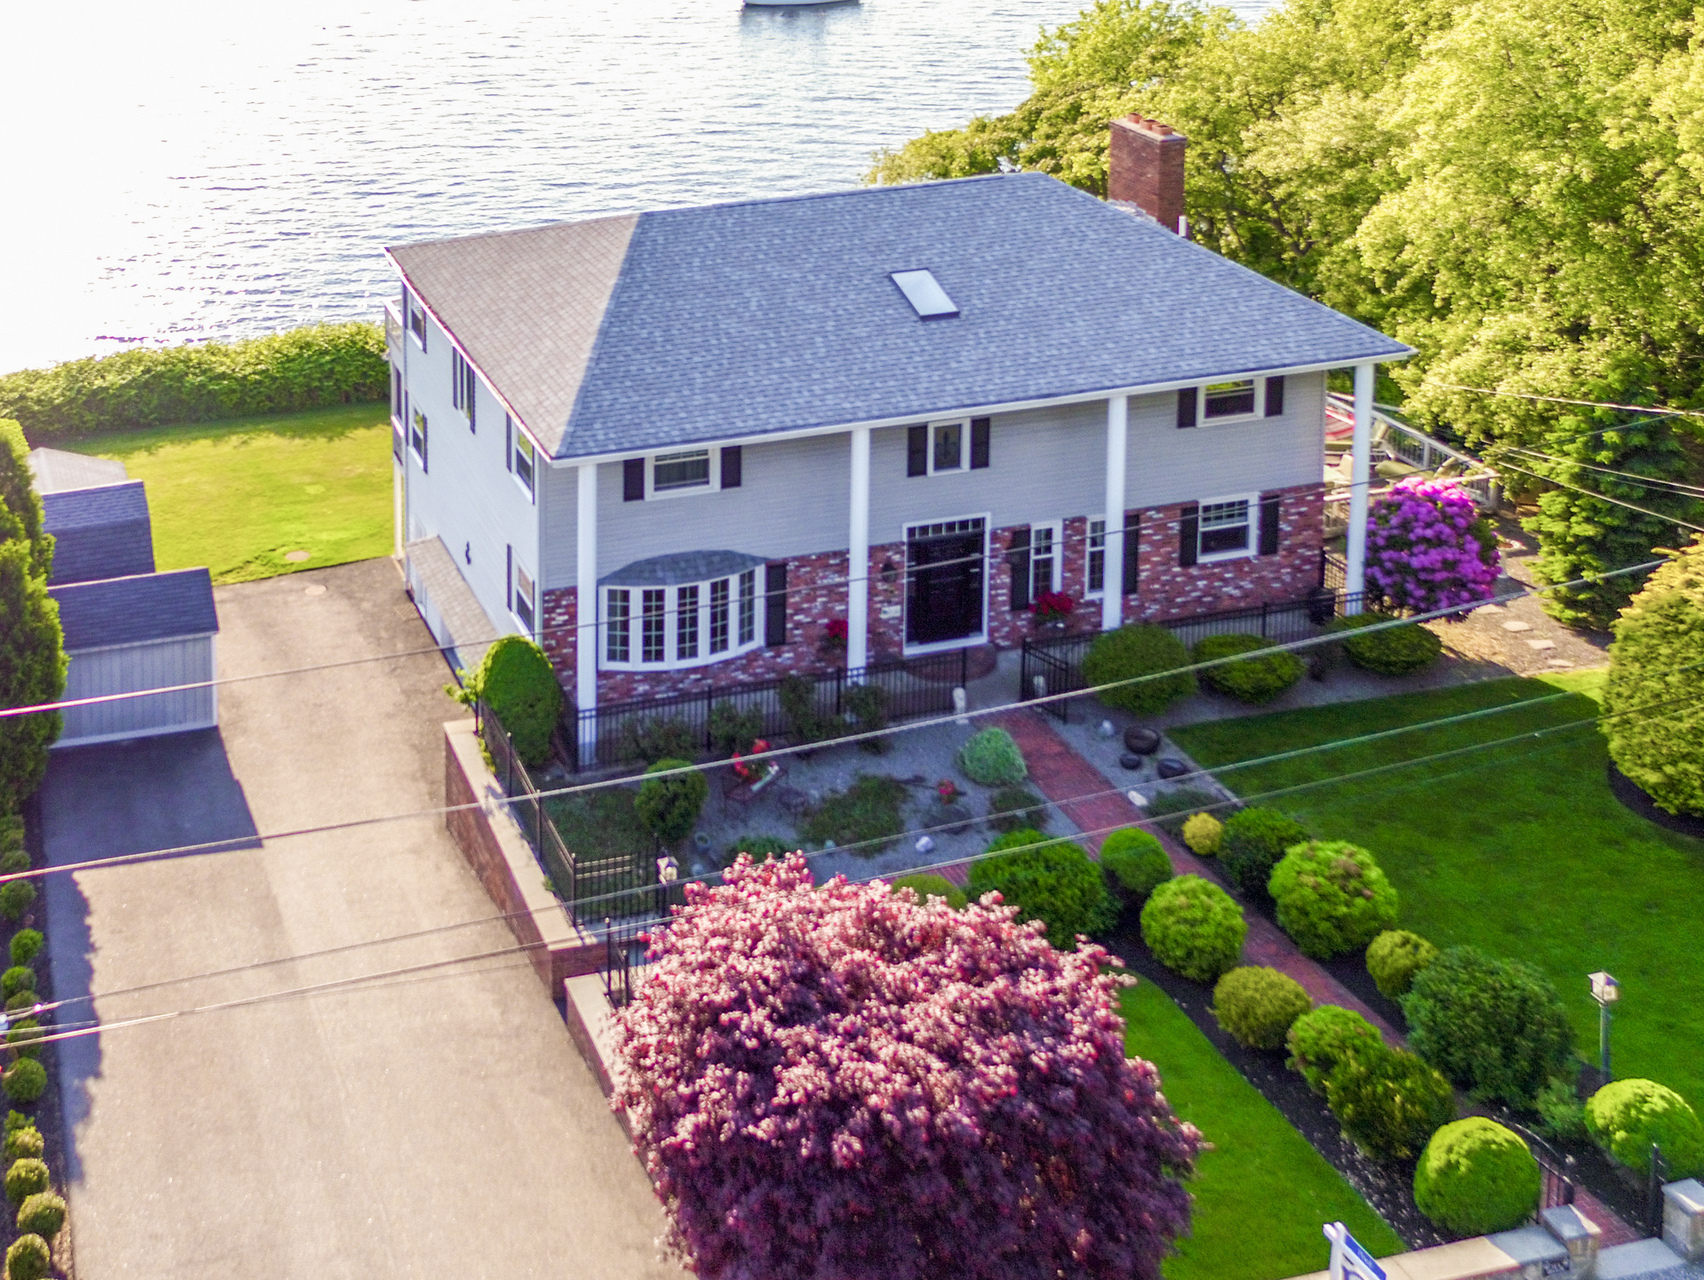 Waterfront home in Jamestown sells for $1.195 million